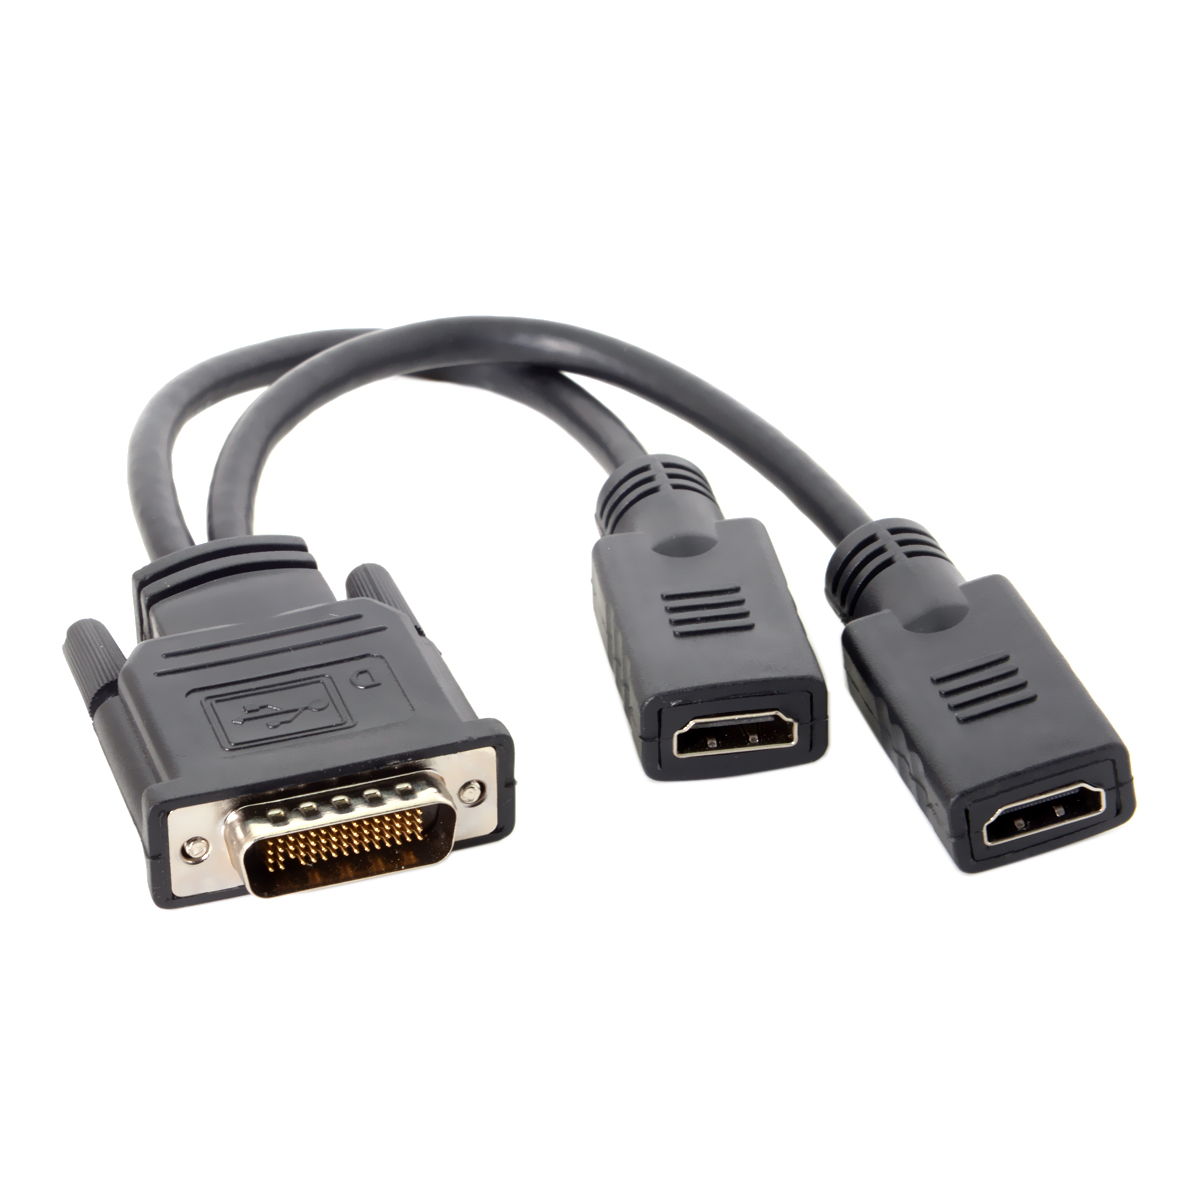  Yiwentec DMS 59 Pin Male to HDMI Female Dual Monitor Extension Cable Adapter for LHF Graphics Card (DMS 59 pin Dual hdmi)  D0508